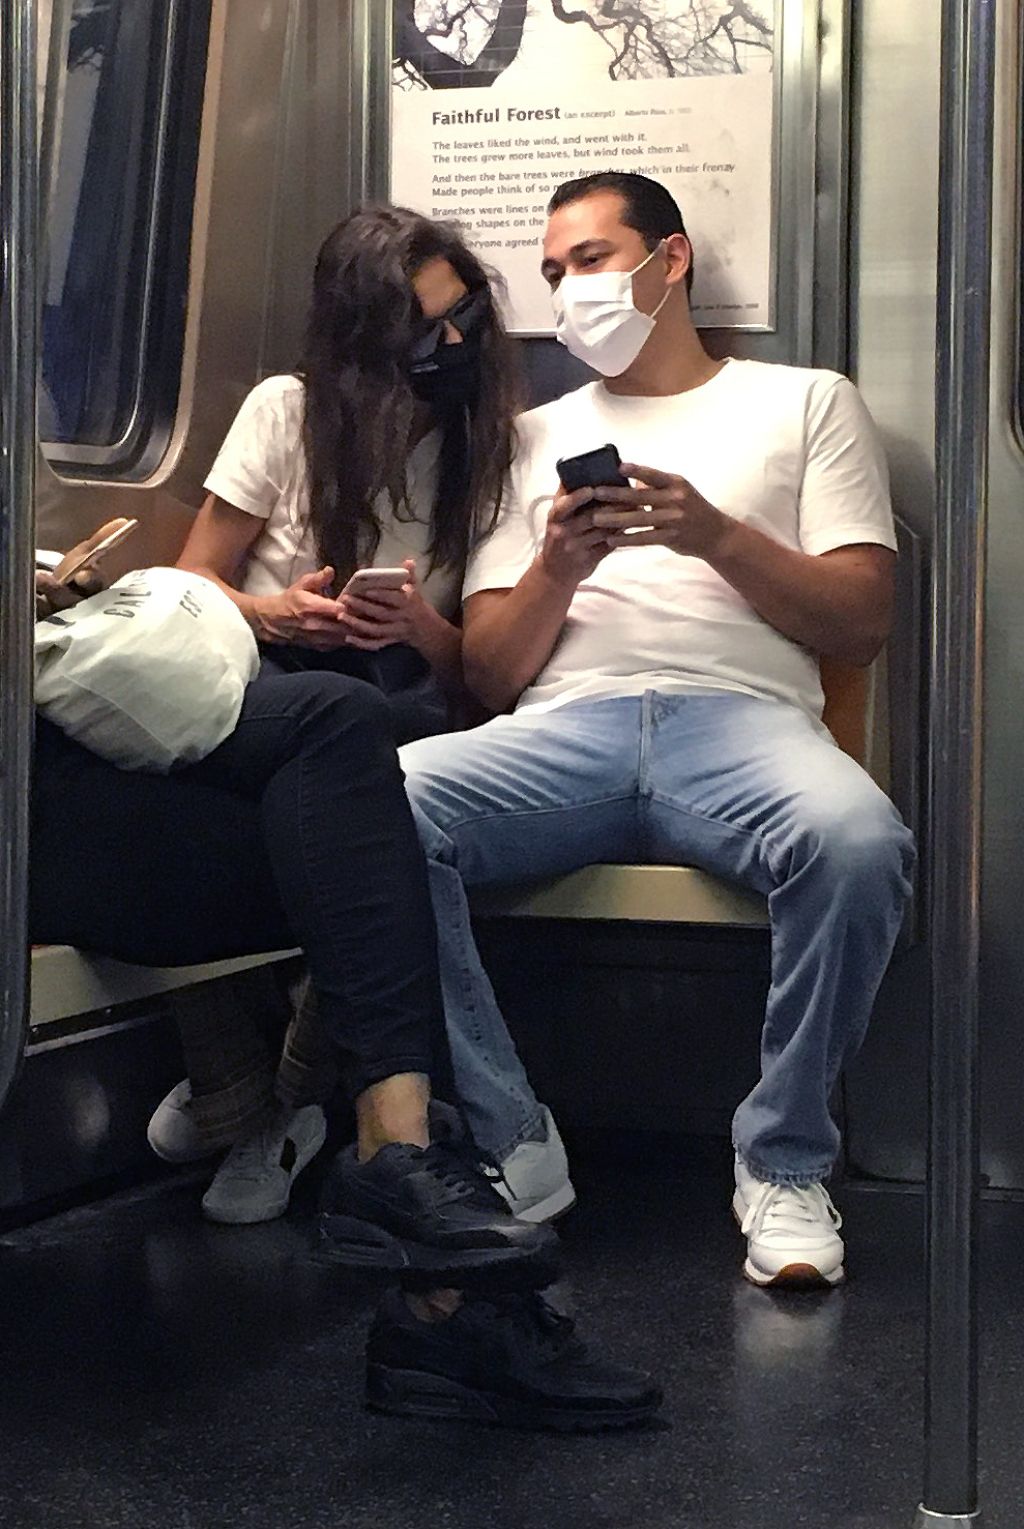 katie-holmes-and-emilio-vitolo-jr.-riding-the-downtown-subway-train-in-manhattan-10-01-2020-6.jpg